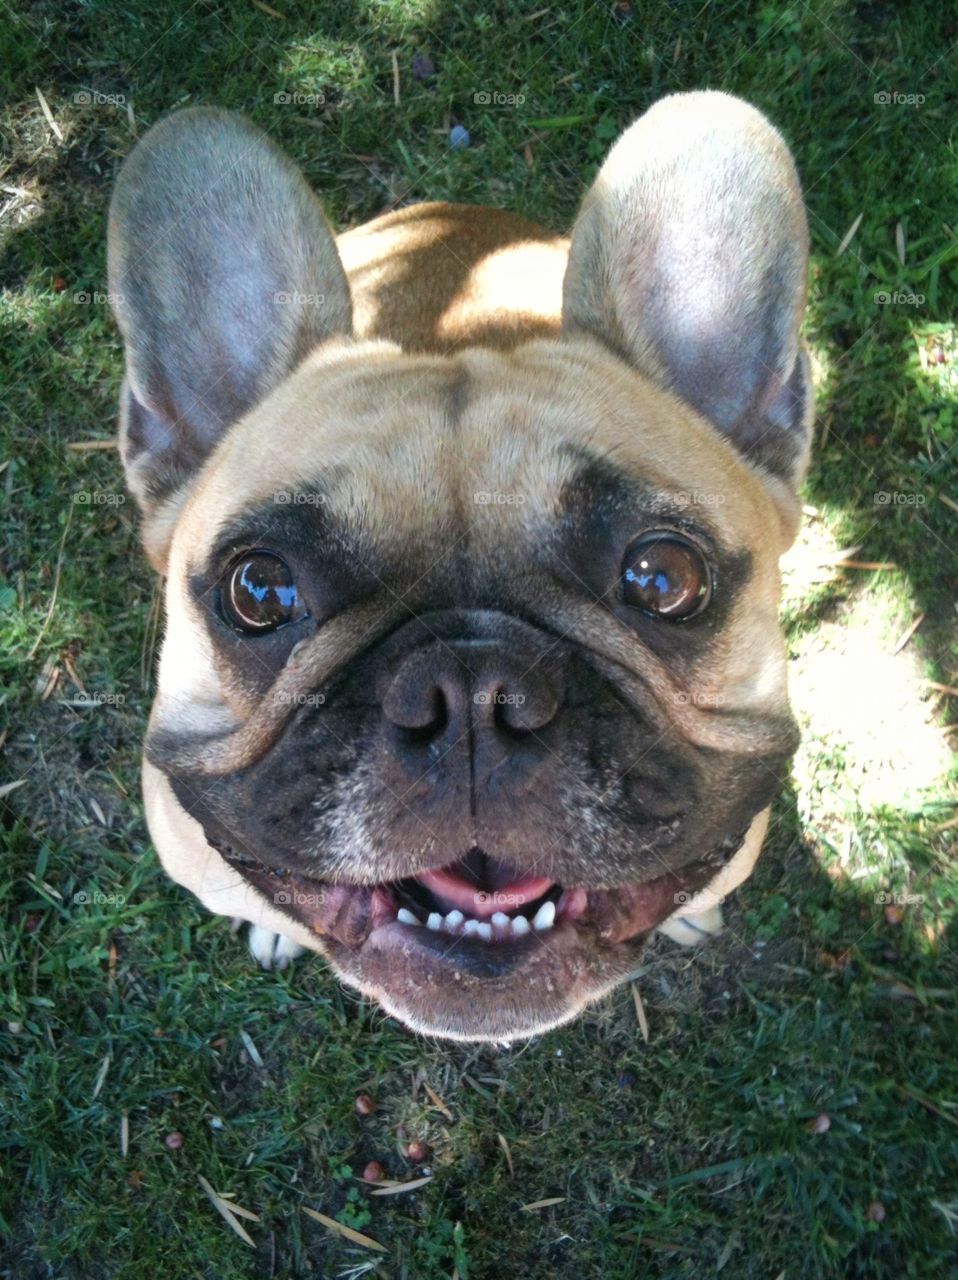 Puppy Love. A cute french bulldog stares up from the ground directly into the camera.